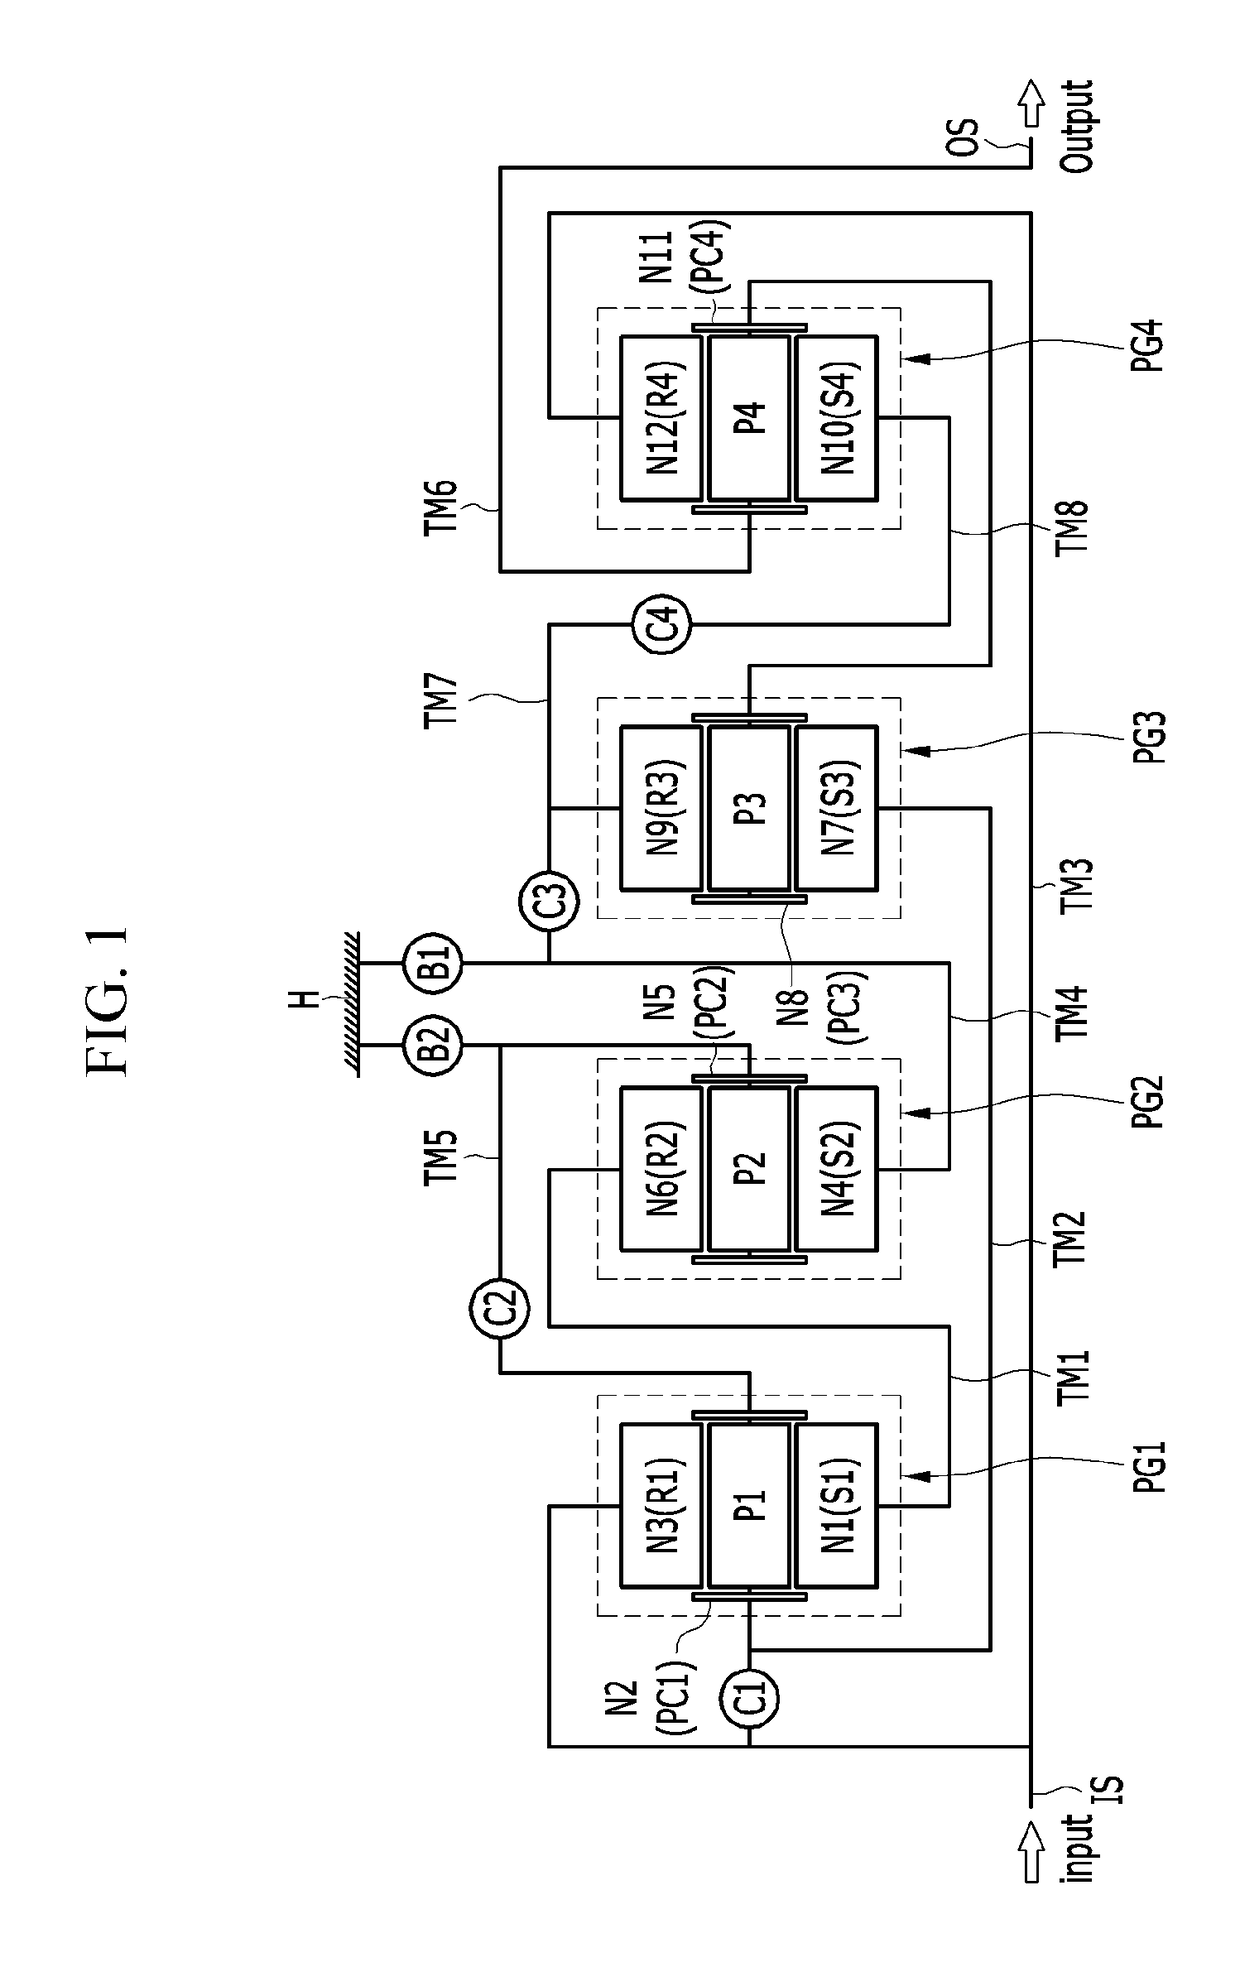 Planetary gear train of an automatic transmission for a vehicle